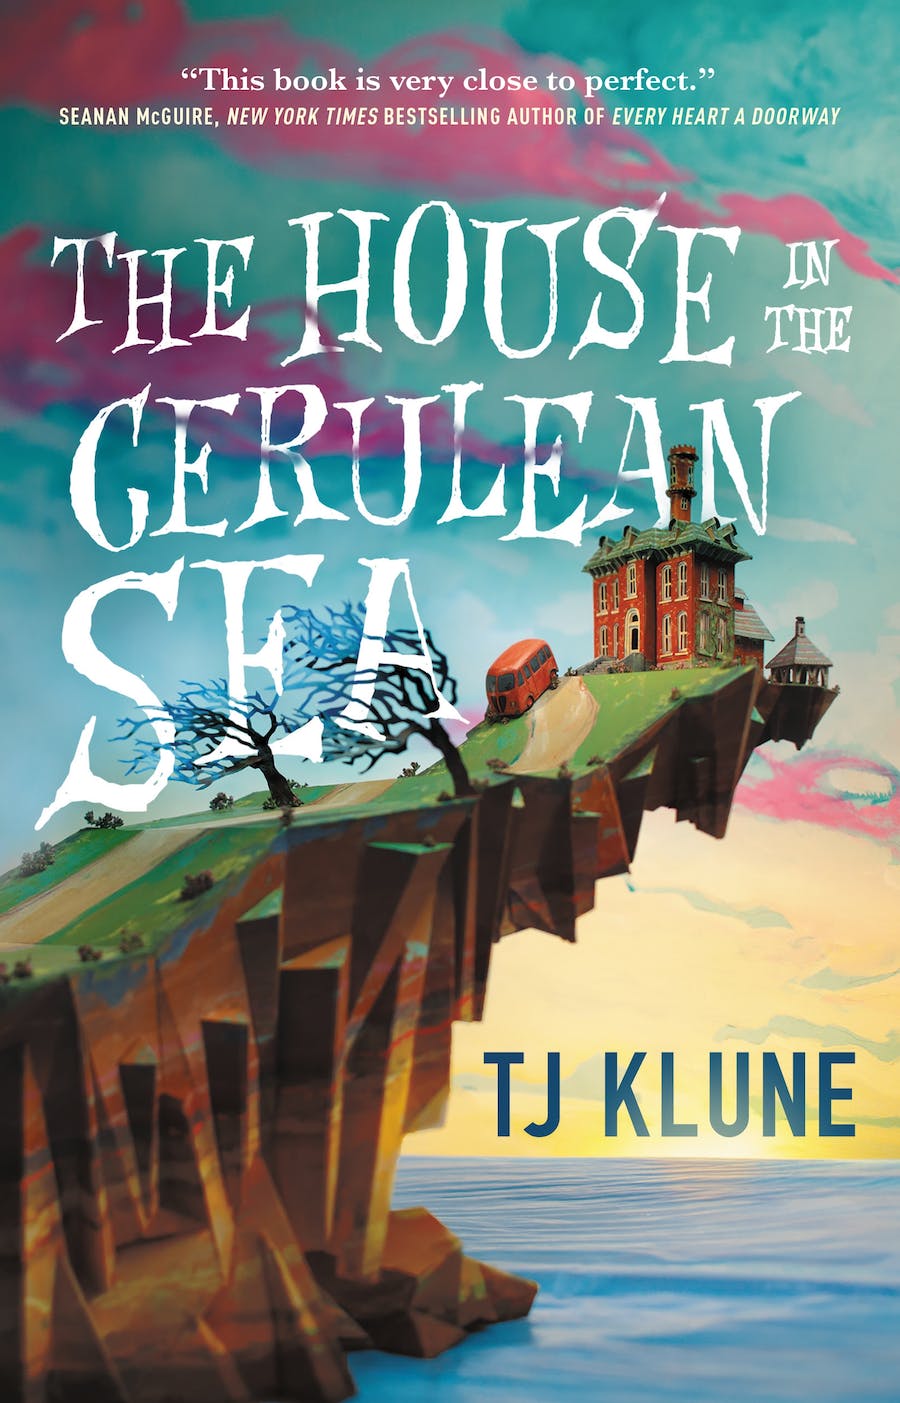 image of the house in the cerulean sea book cover